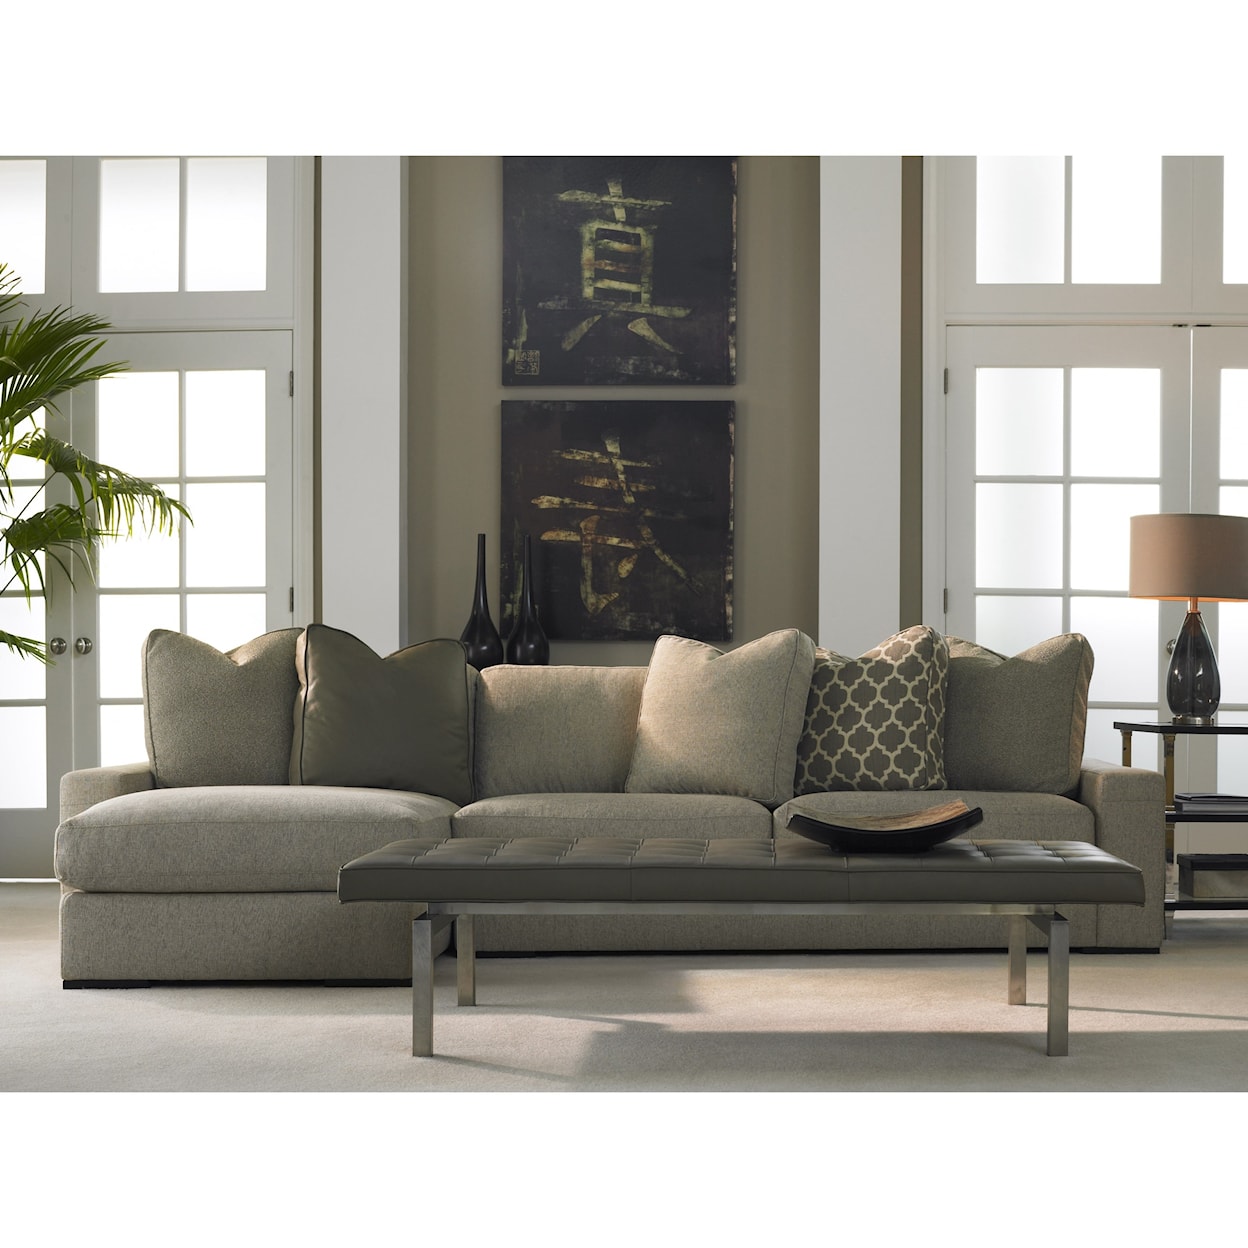 American Leather Westchester 2-Piece Sectional with Right-Sitting Chaise